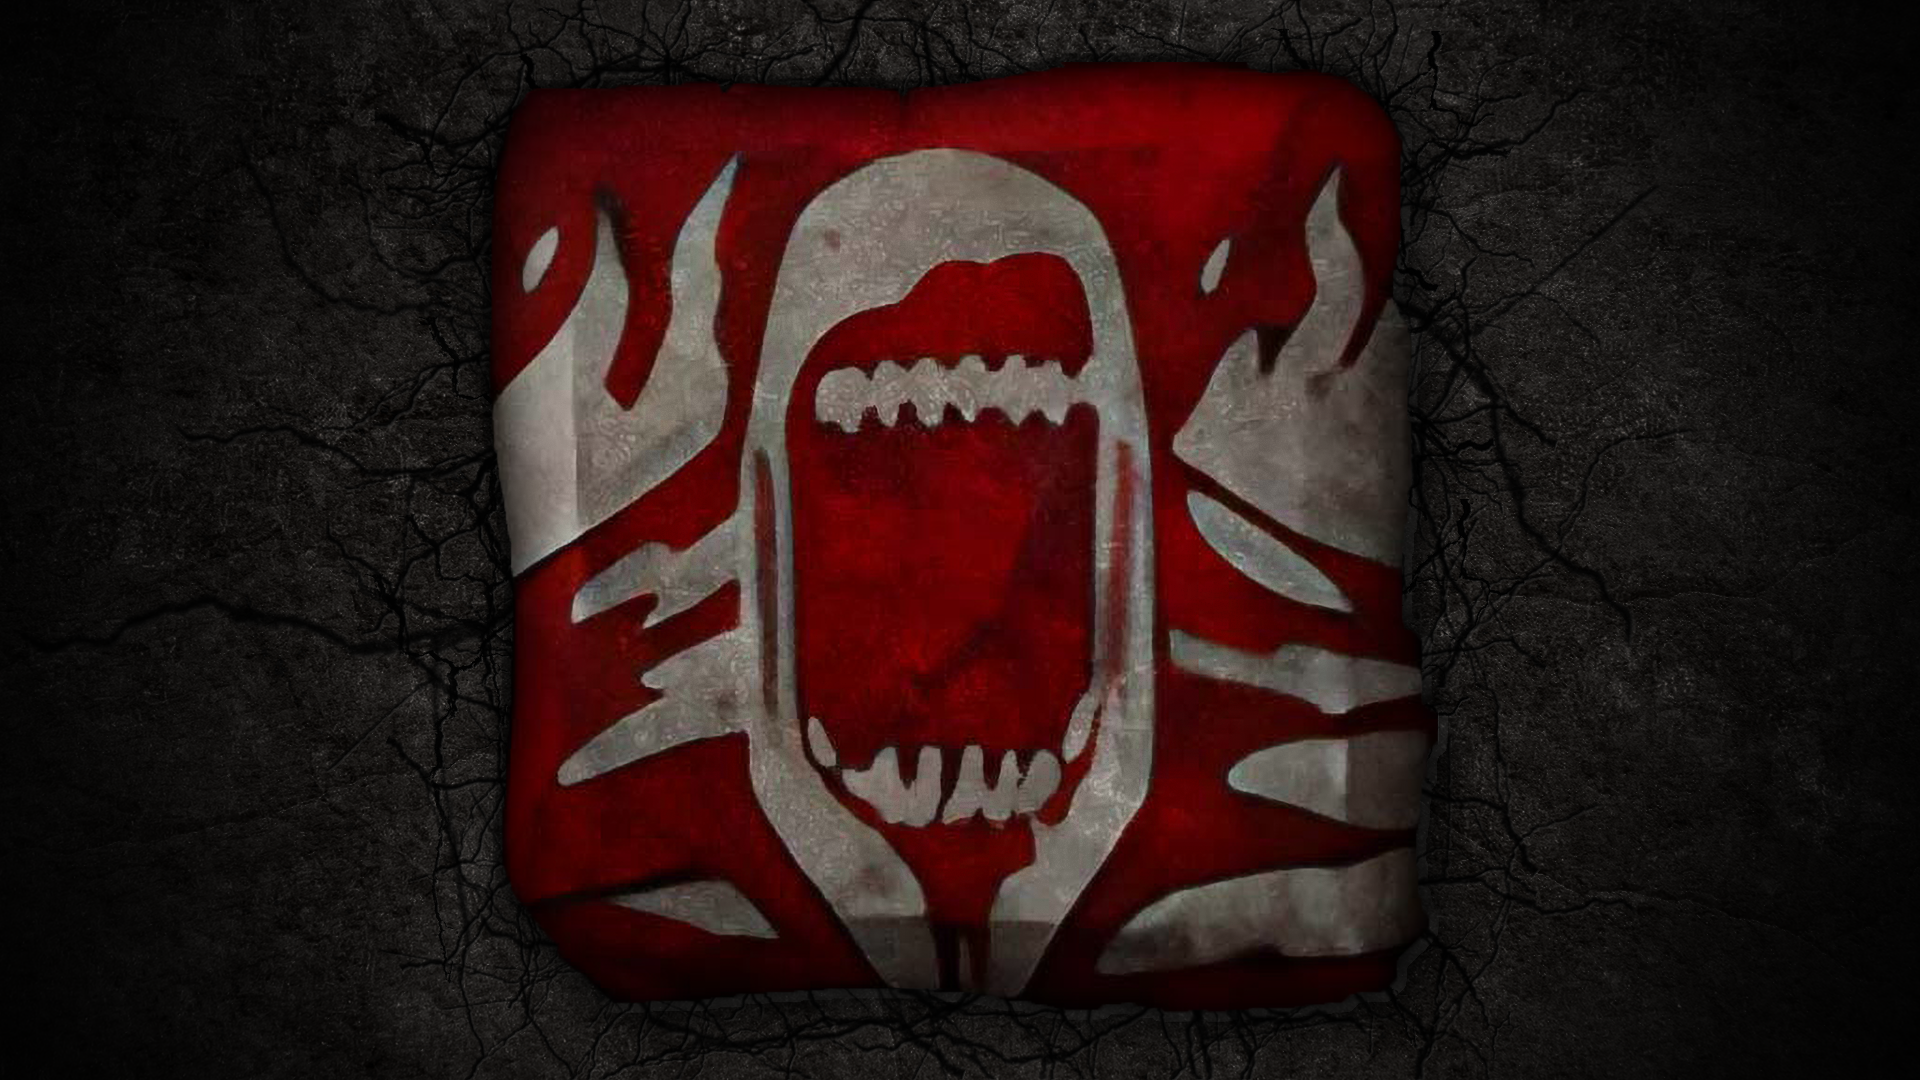 Icon for Defeat the demon